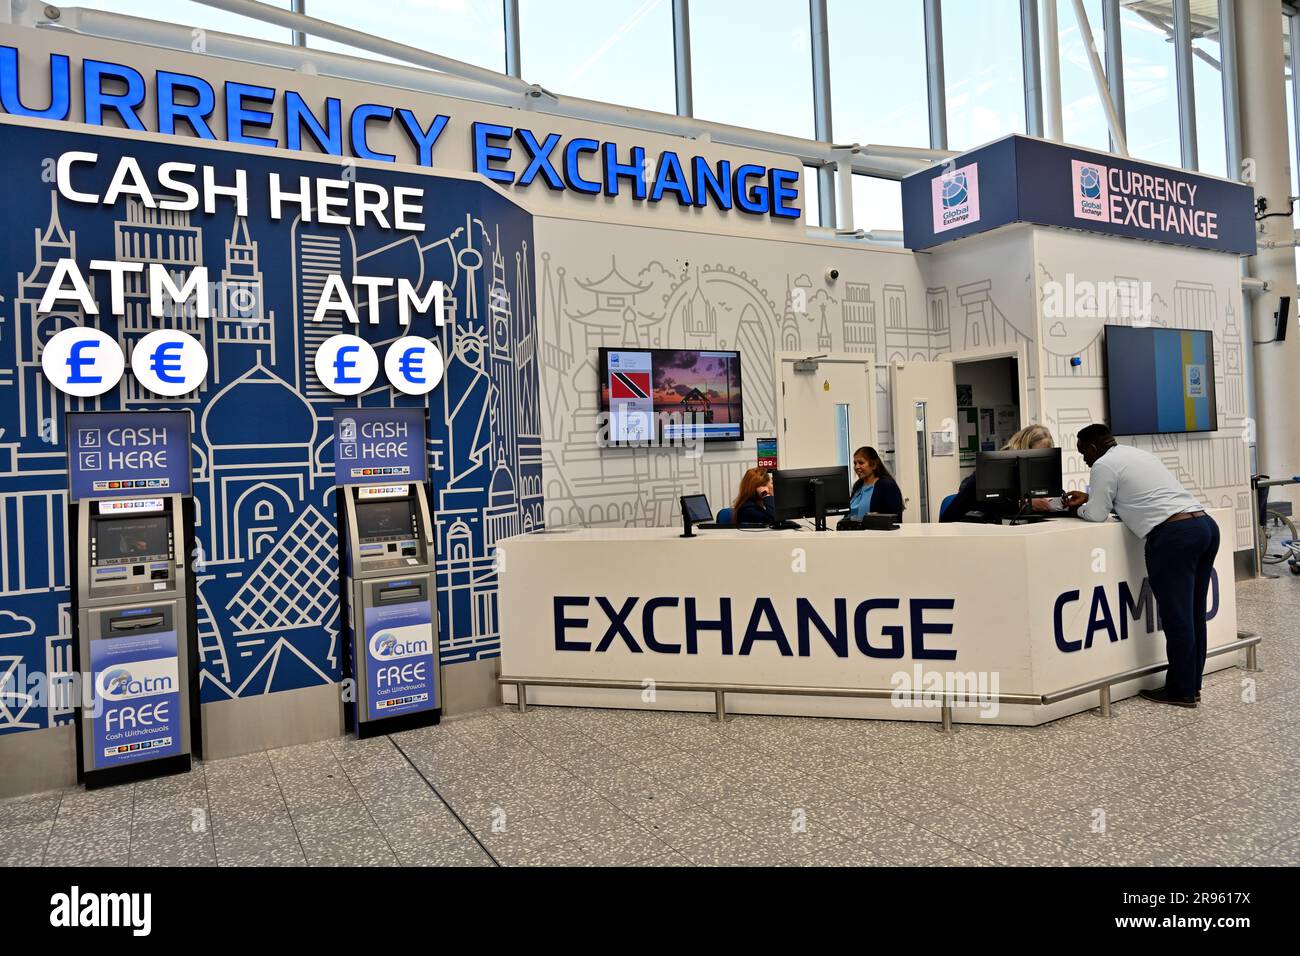 Currency exchange and cash for travel in airport arrivals / departure area Stock Photo